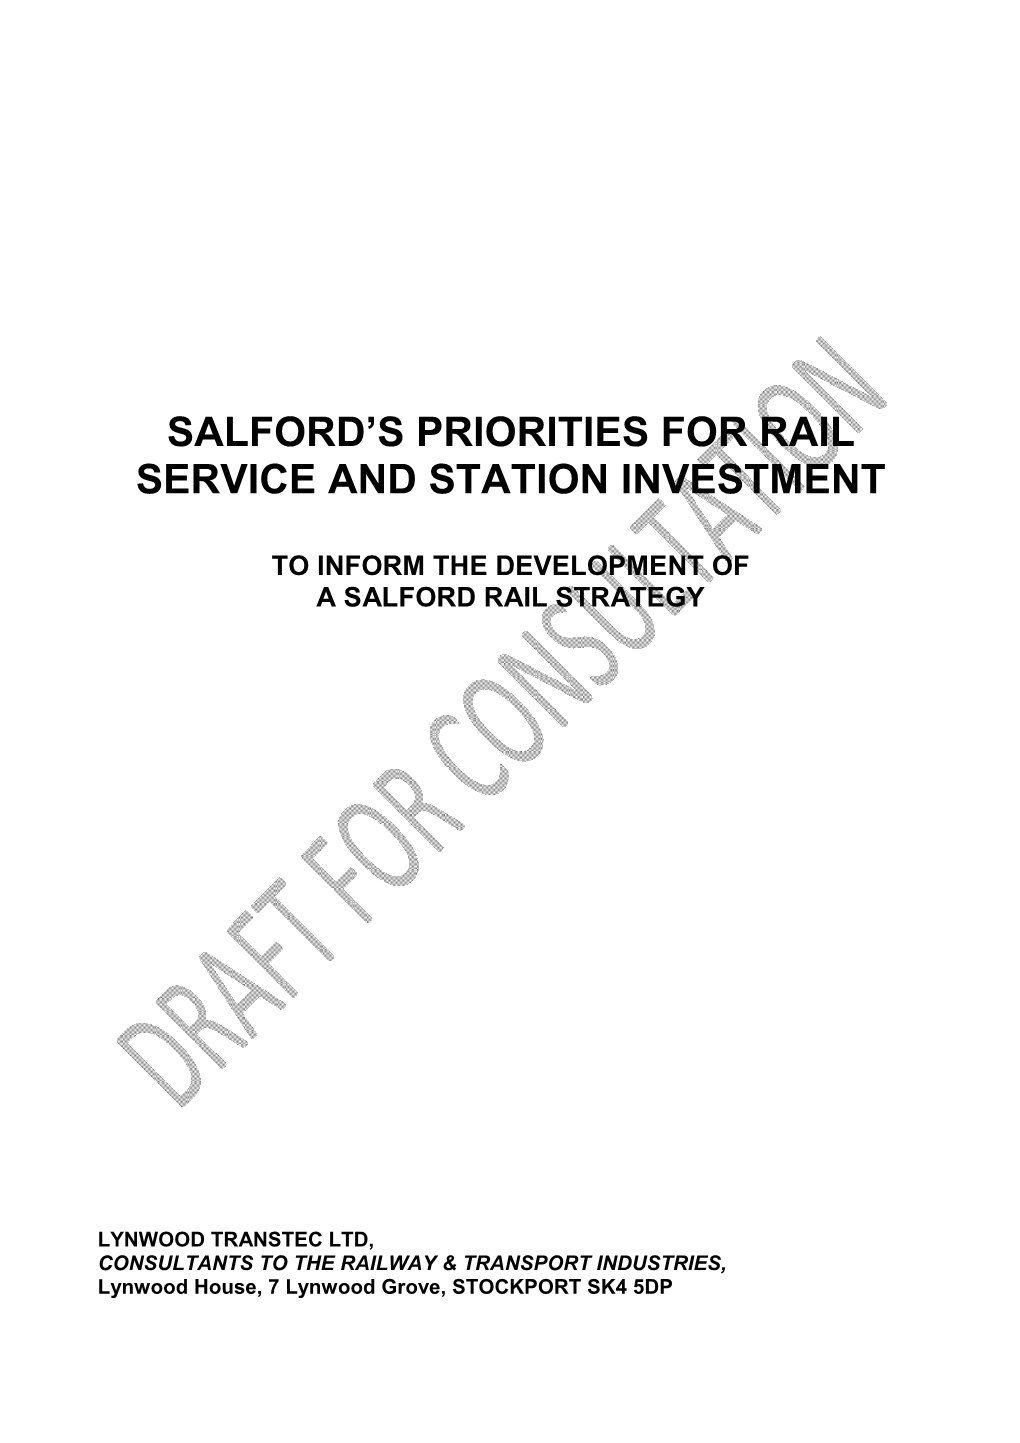 Salford's Priorities for Rail Service and Station Investment